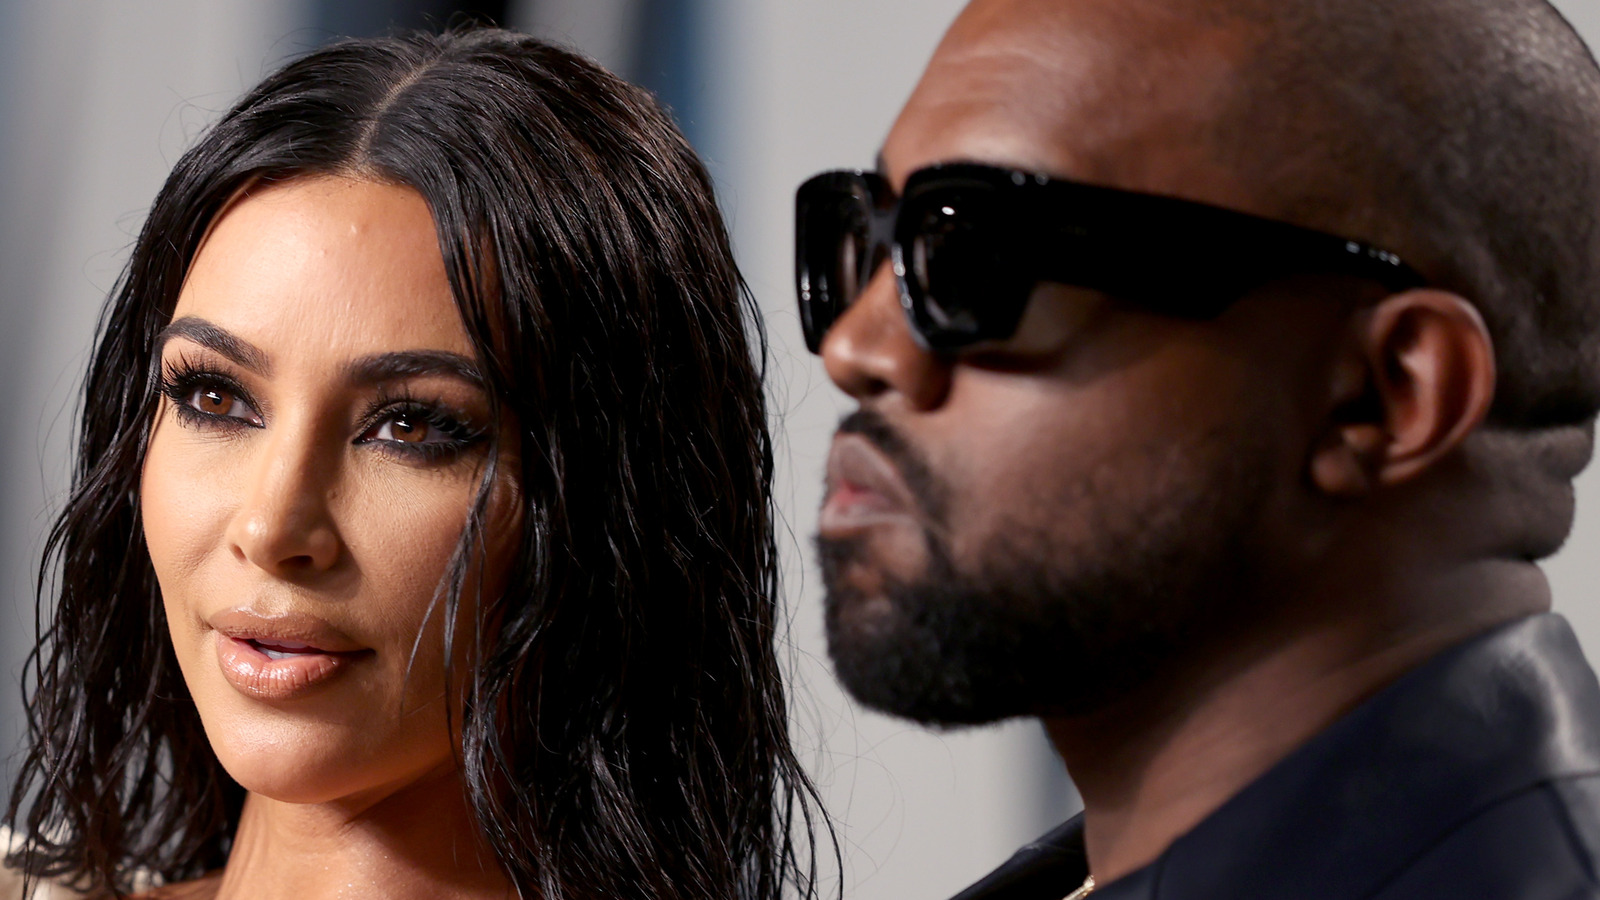 Will Kim Kardashian And Kanye West Spend The Holidays Together?